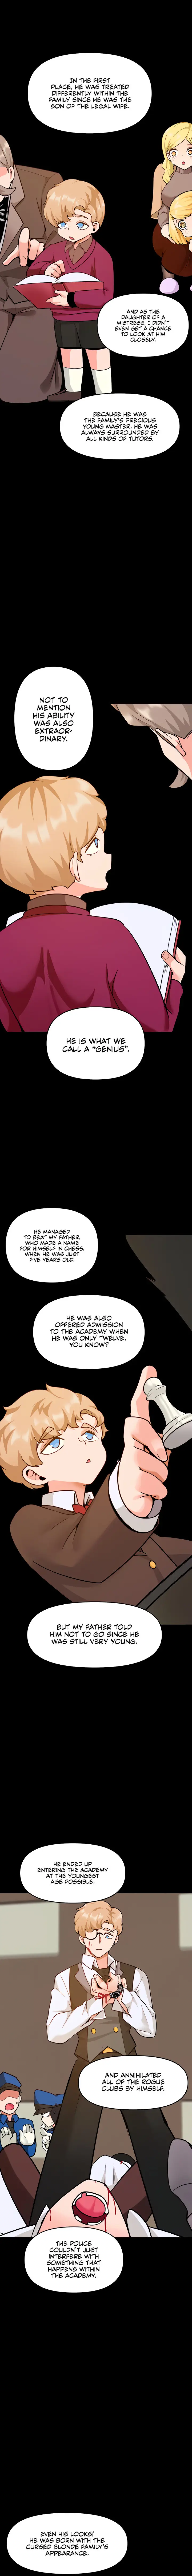 the-hypnosis-app-was-fake-chap-40-5